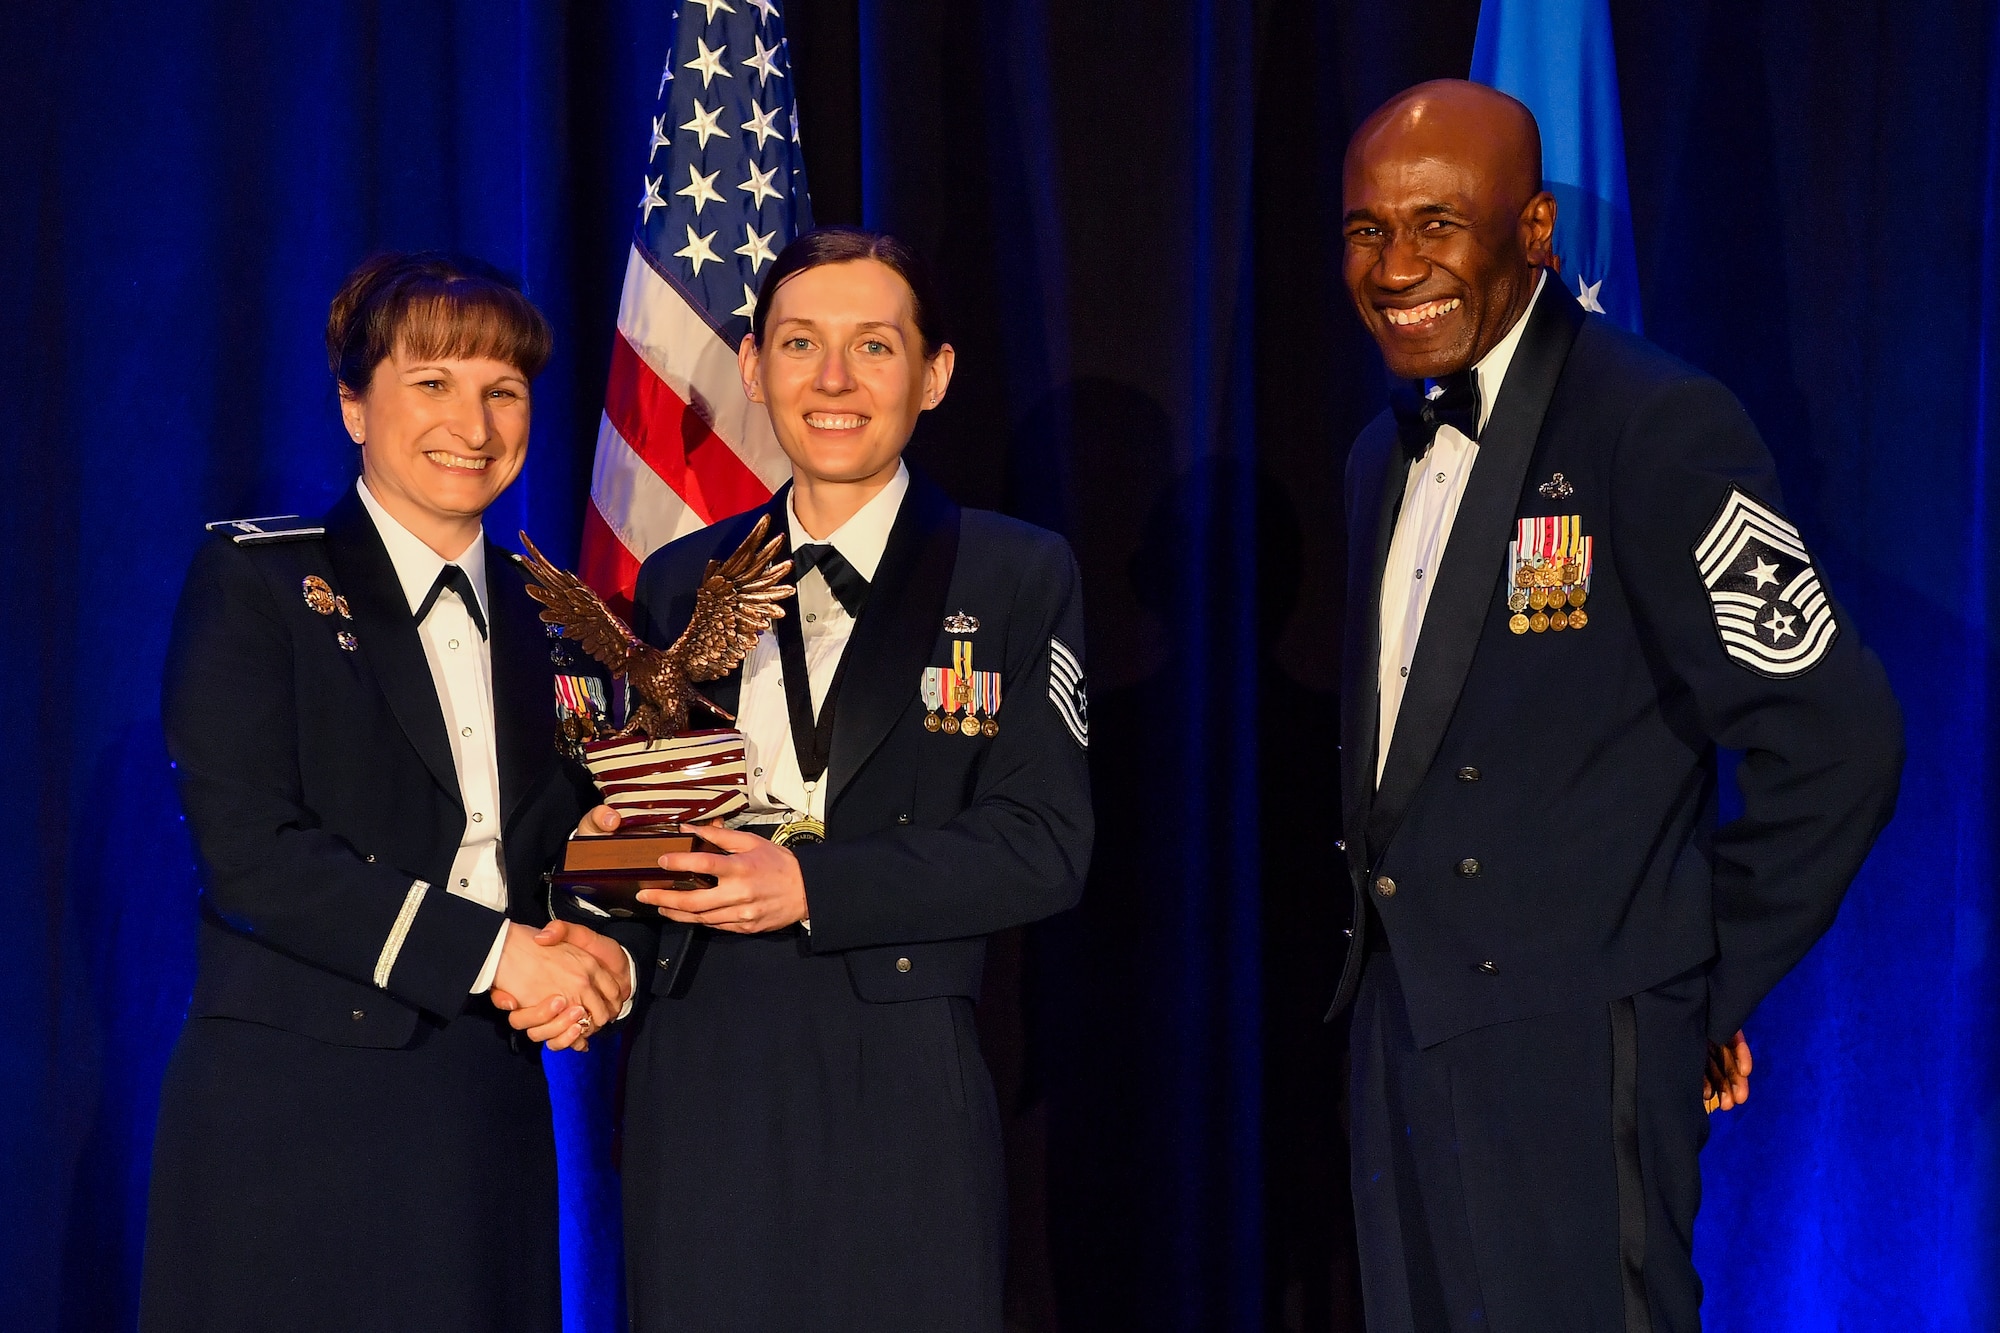 Tech. Sgt. Inna Lvova, 50th Comptroller Squadron noncommissioned officer in charge of financial analysis, holds an award for winning 50th Space Wing NCO of the Year award March 8, 2019, Colorado Springs, Colorado. After winning NCO of the year for the 50th Space Wing, Lvova earned the 12 Outstanding Airmen of the Year Award, NCO category, for the Air Force. (U.S. Air Force photo by Kathryn Calvert)